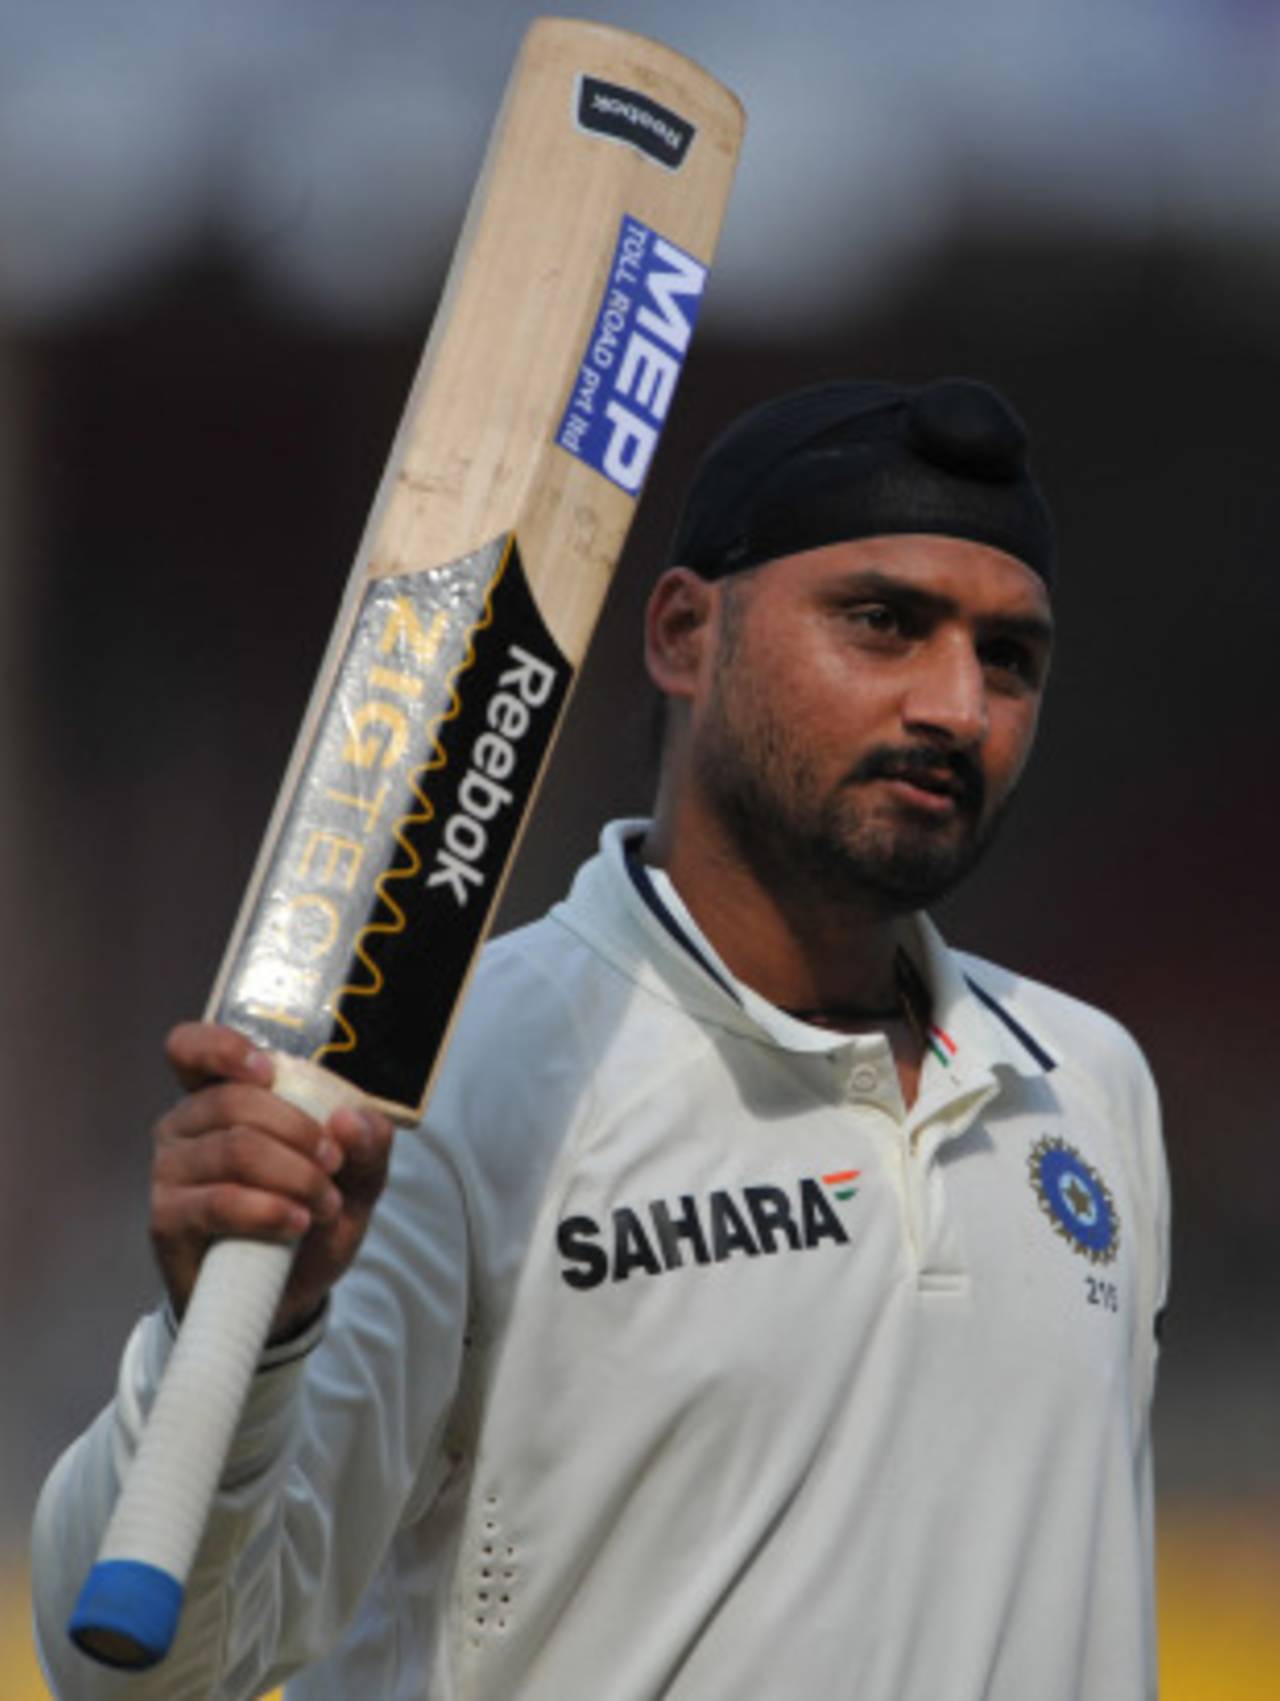 Harbhajan Singh after reaching his maiden Test century, India v New Zealand, 1st Test, Ahmedabad, 5th day, November 8, 2010